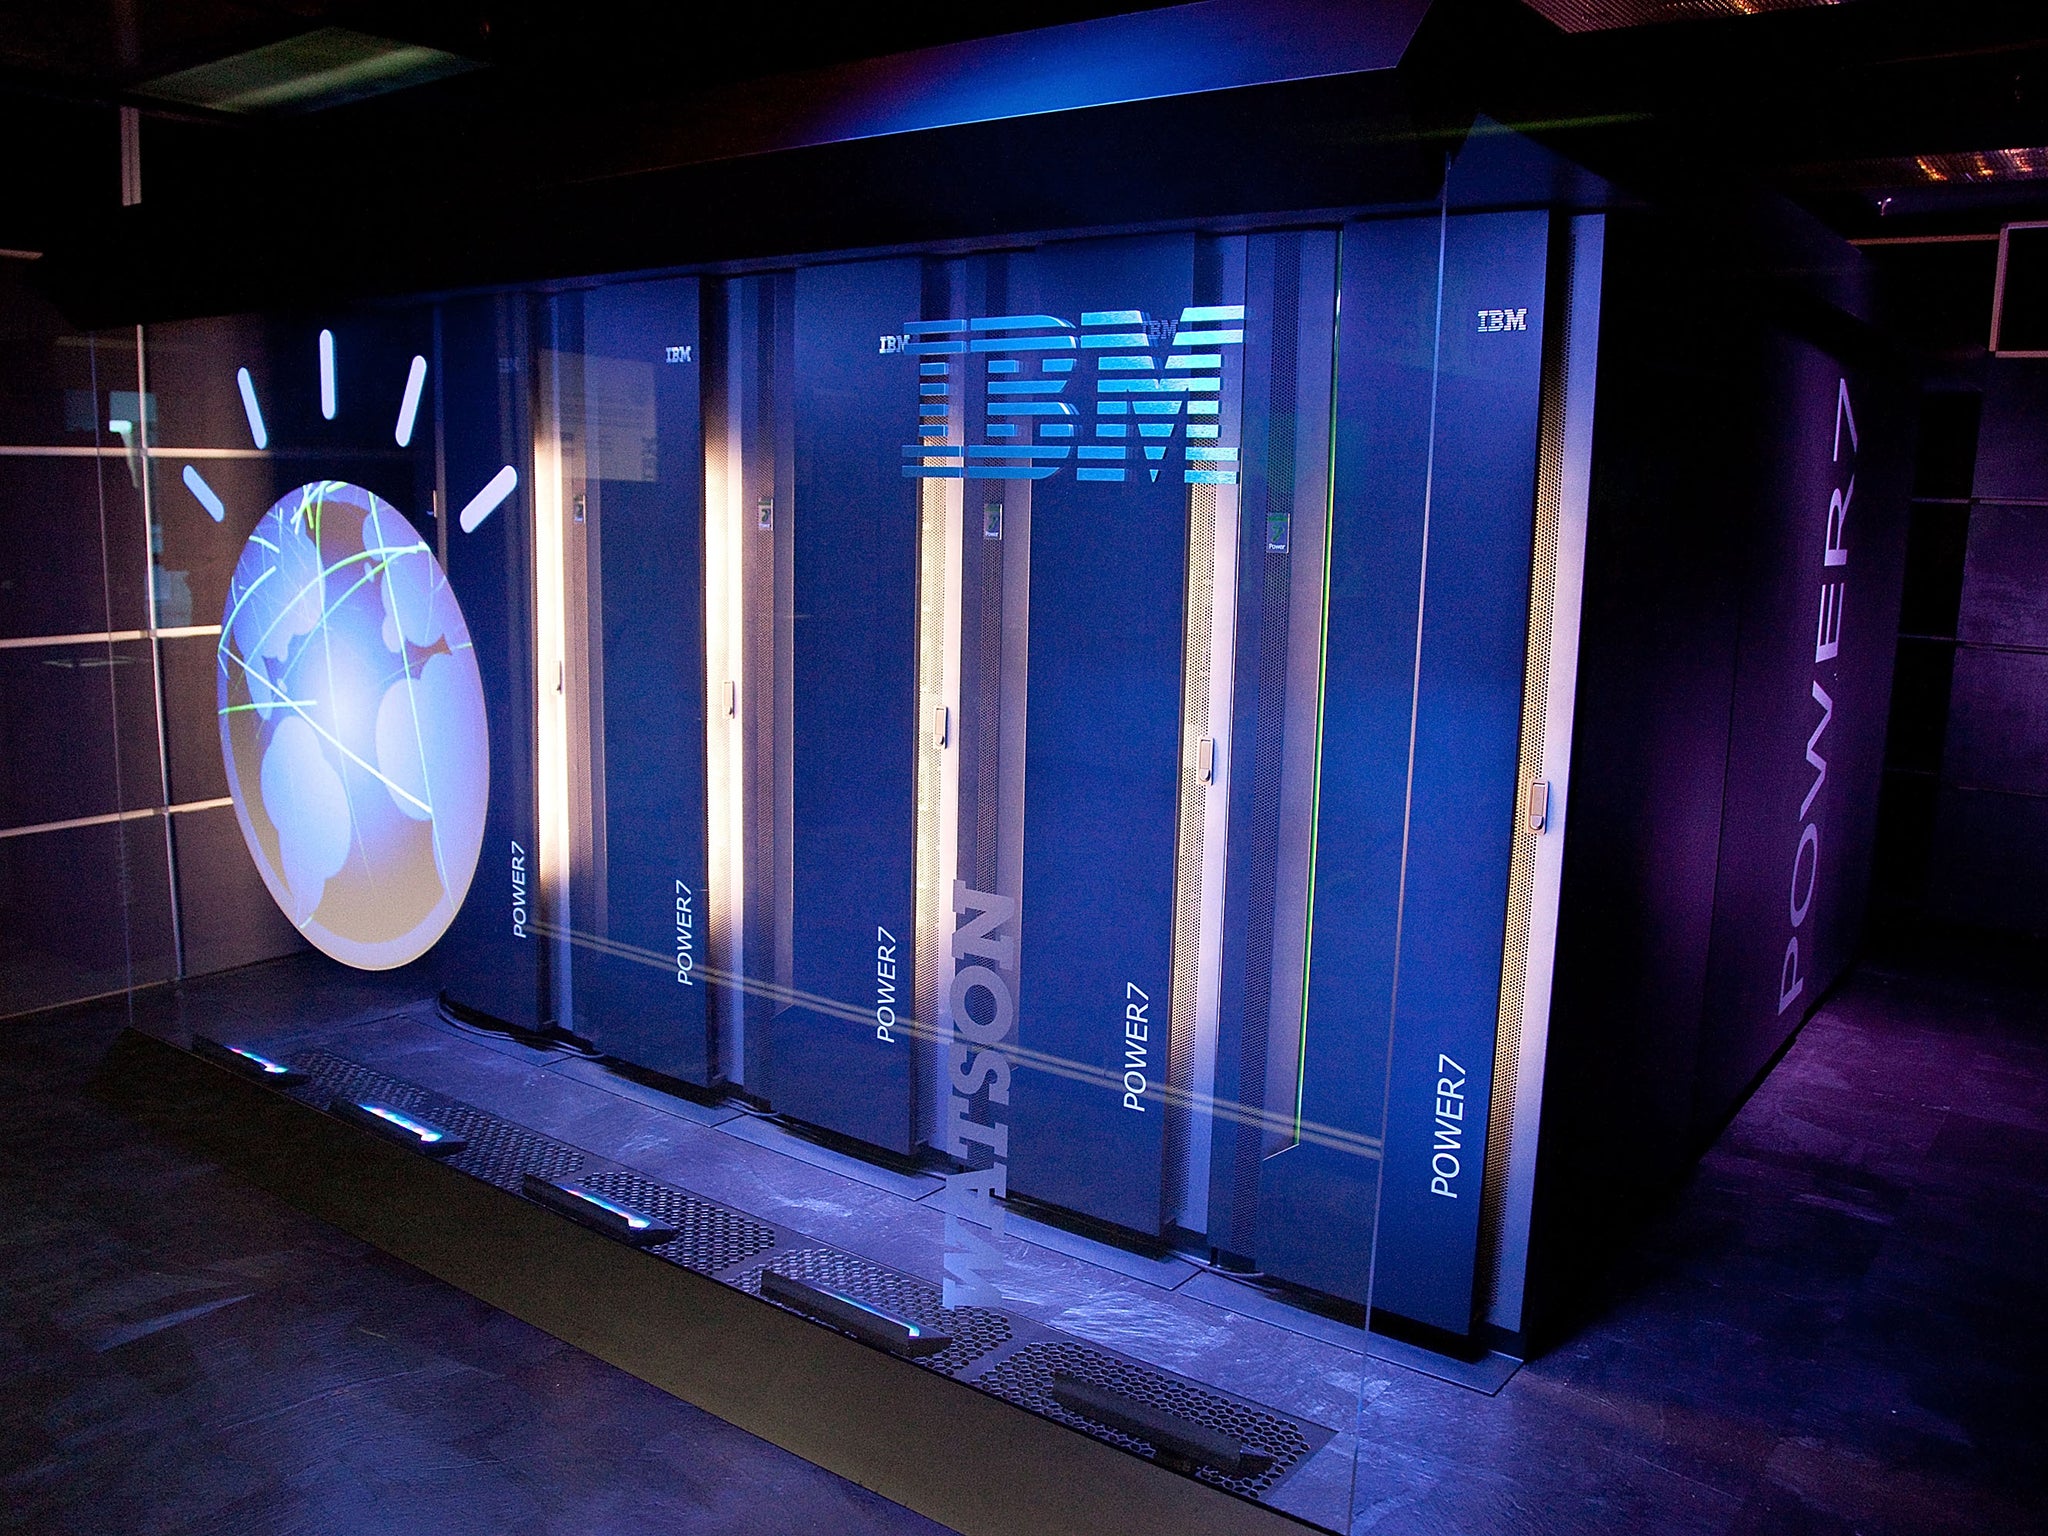 A general view of IBM's 'Watson' computing system at a press conference to discuss the upcoming Man V. Machine "Jeopardy!" competition at the IBM T.J. Watson Research Center